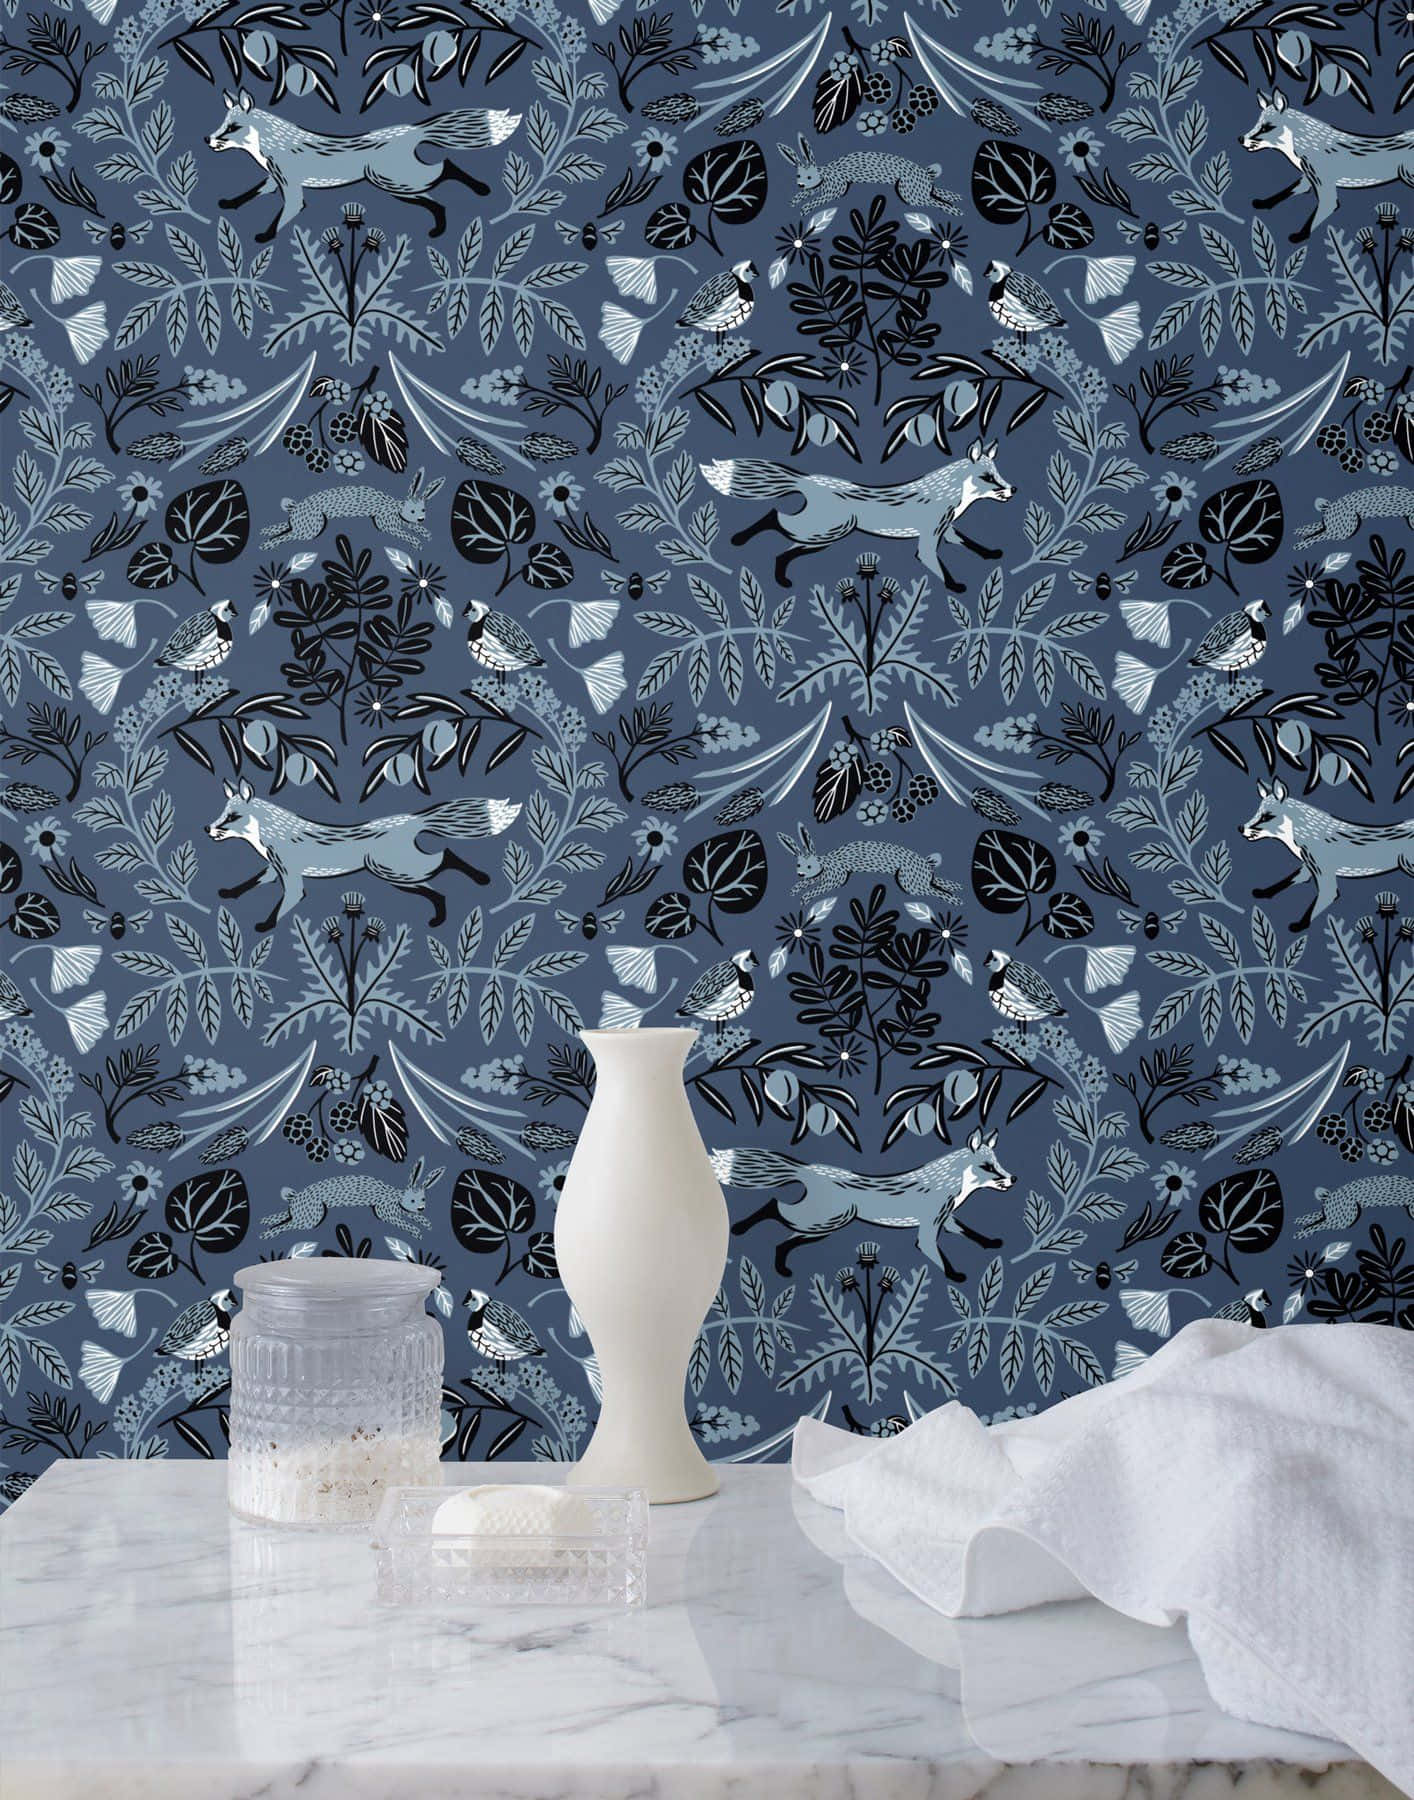 Experience restful relaxation with Indigo. Wallpaper